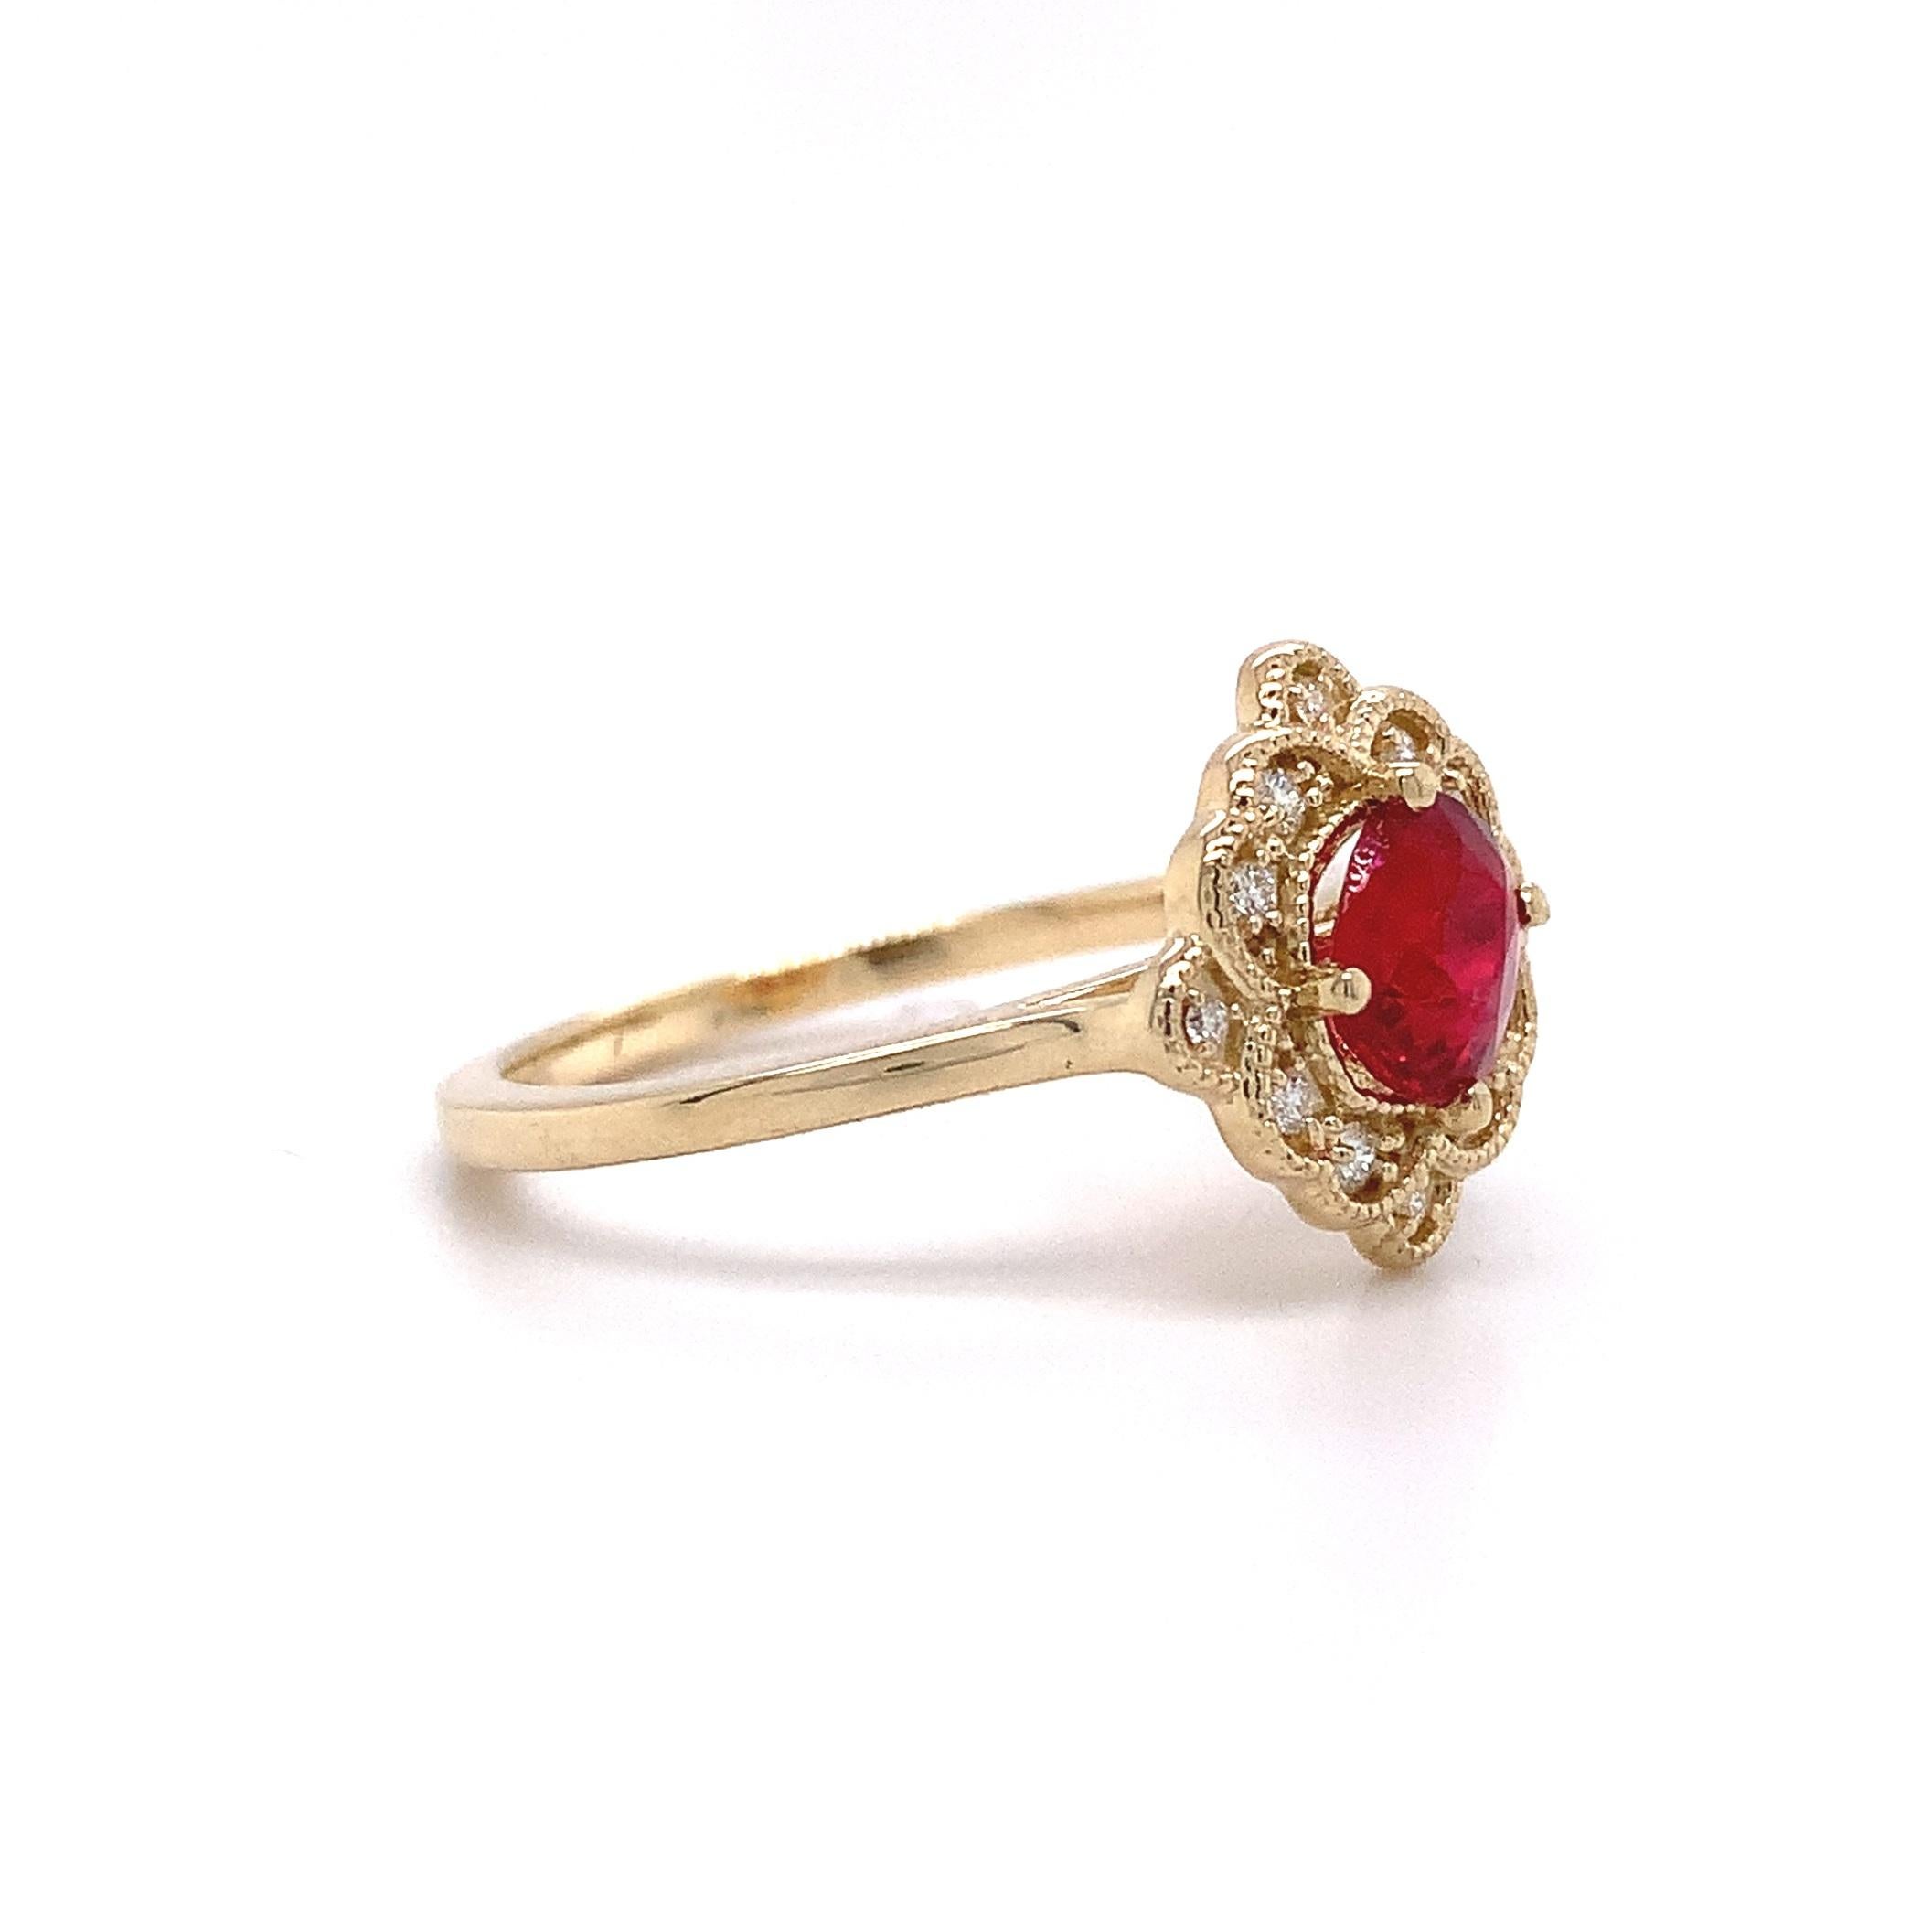 14K yellow gold diamond ring featuring a Jedi red spinel. The red spinel weighs .77 cts. It is Burmese and no heat. The spinel is cushion cut and measures about 6.2mm x 5.75mm. There is a small chip. There are 12 small round diamond accents